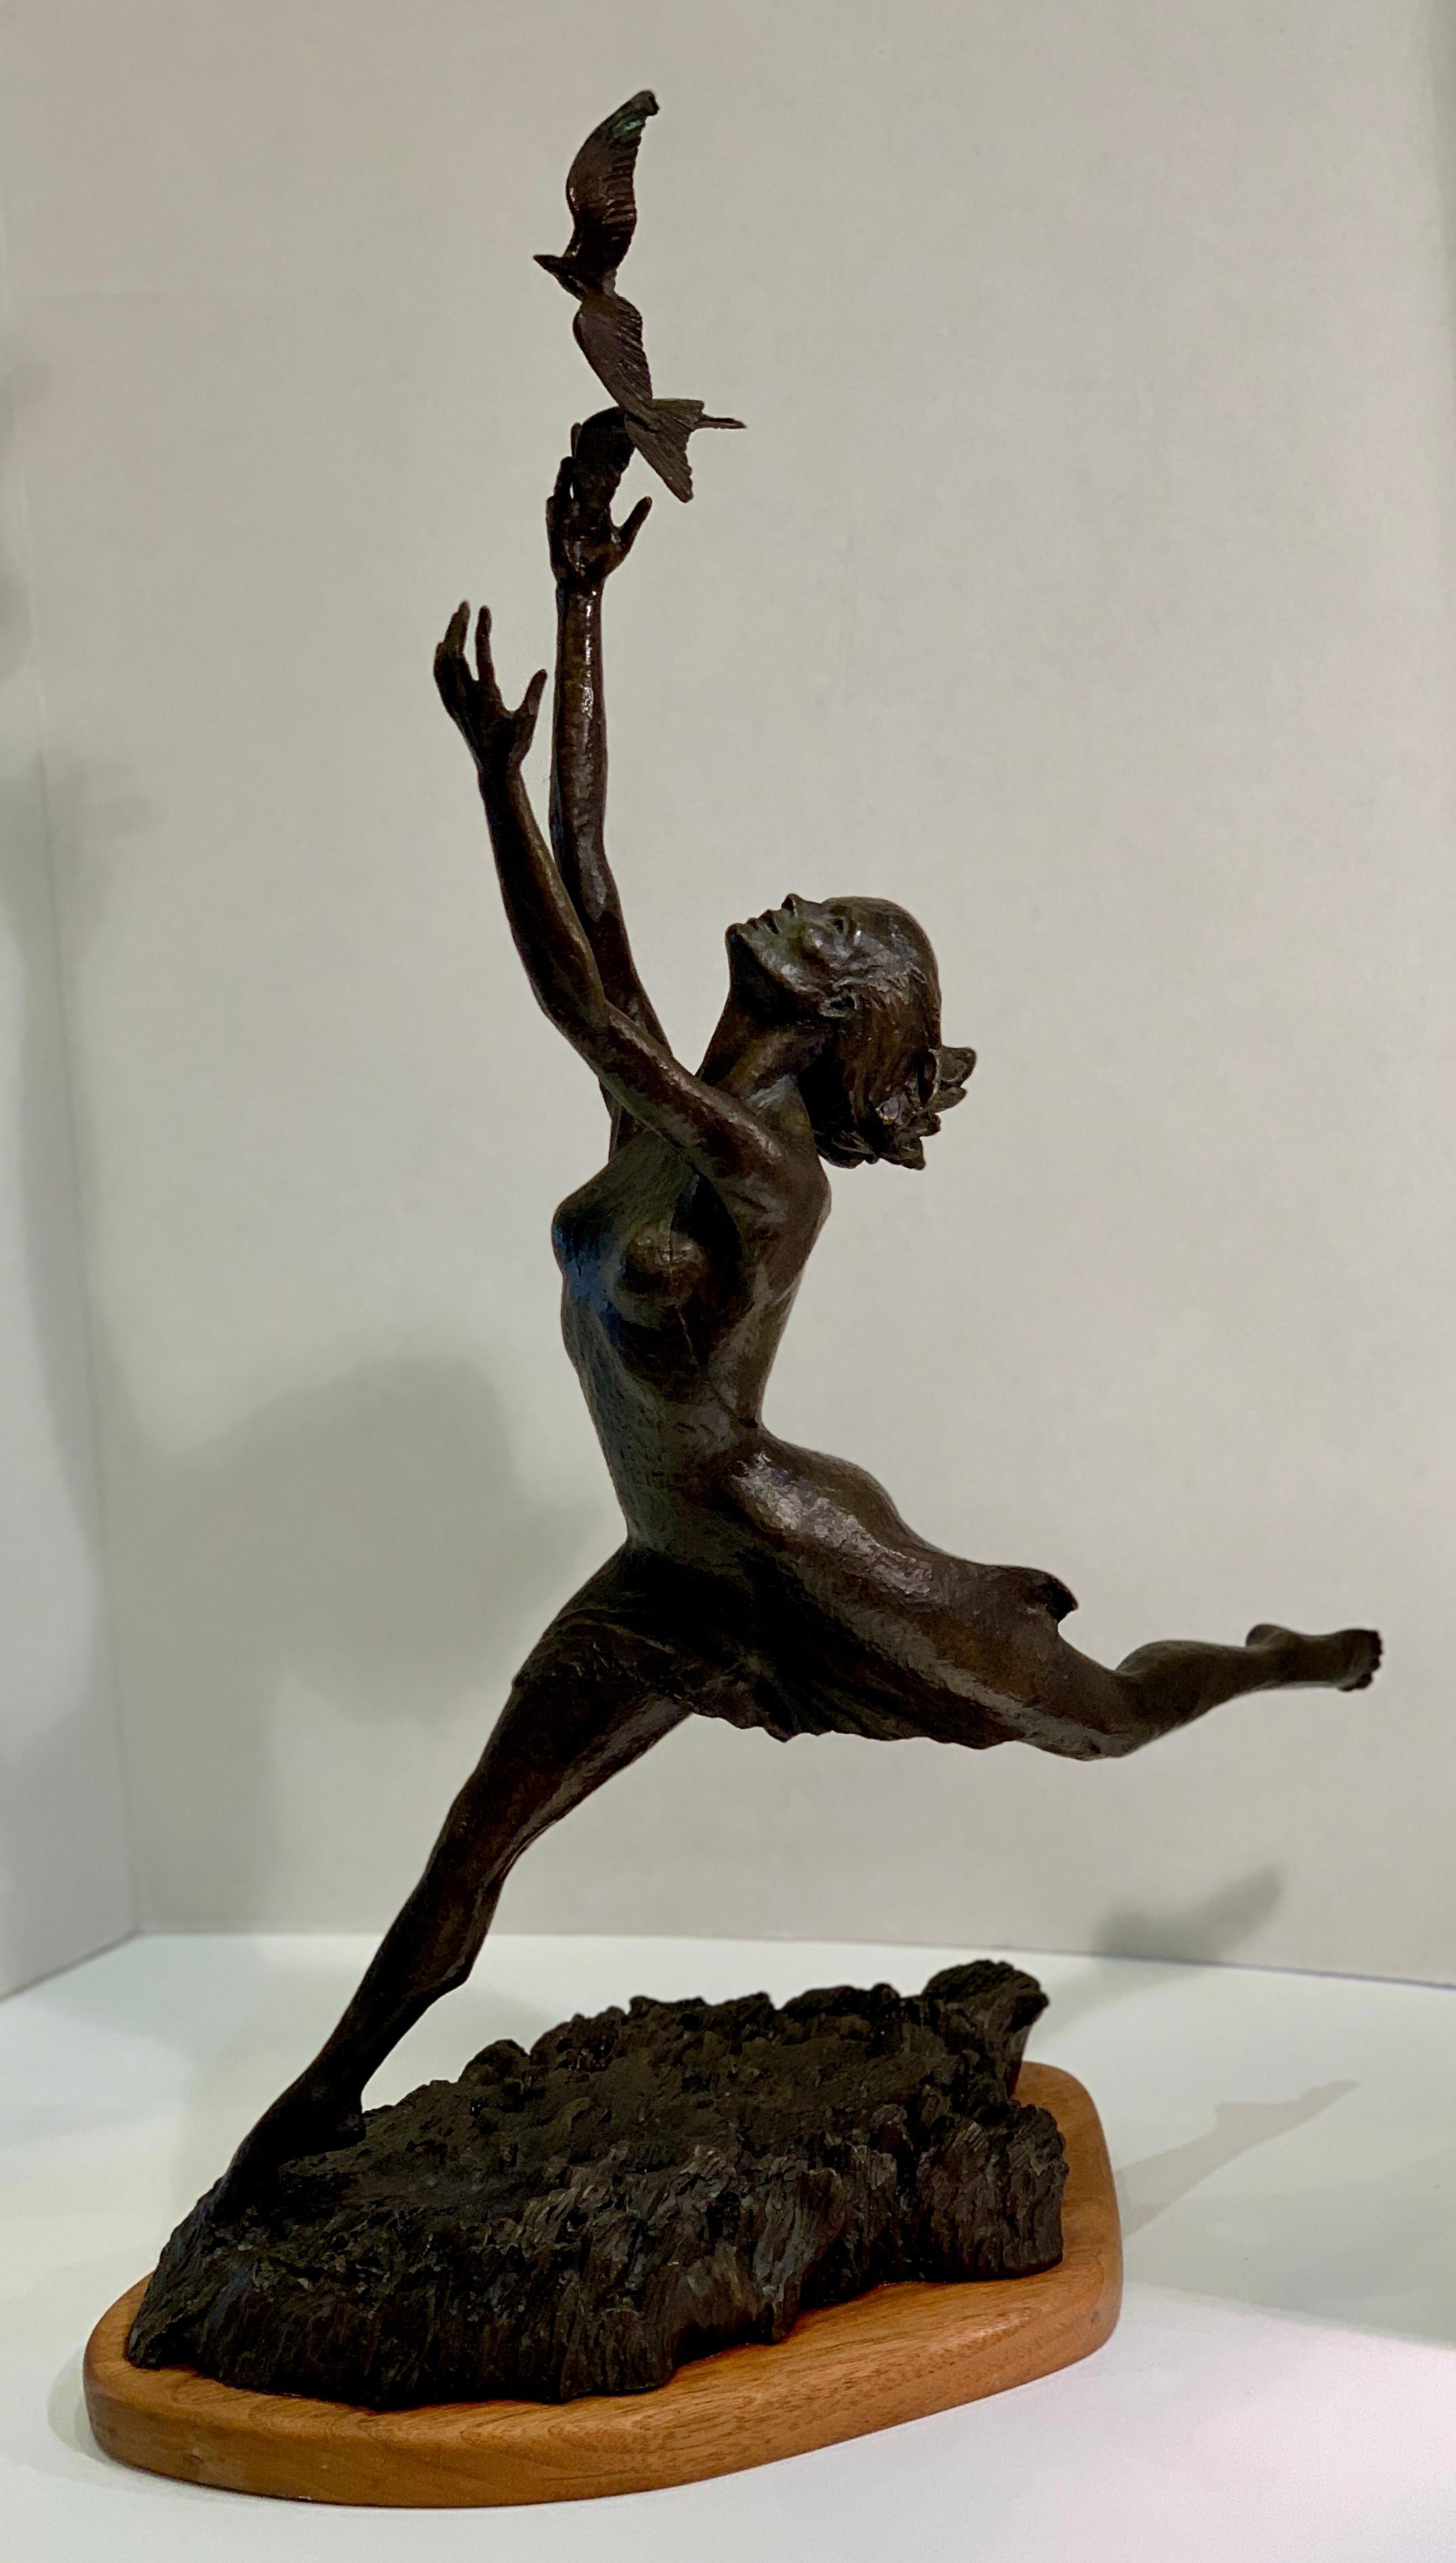 Art Deco Style Bronze Sculpture of a Woman Reaching for Seagulls by M. Young 1